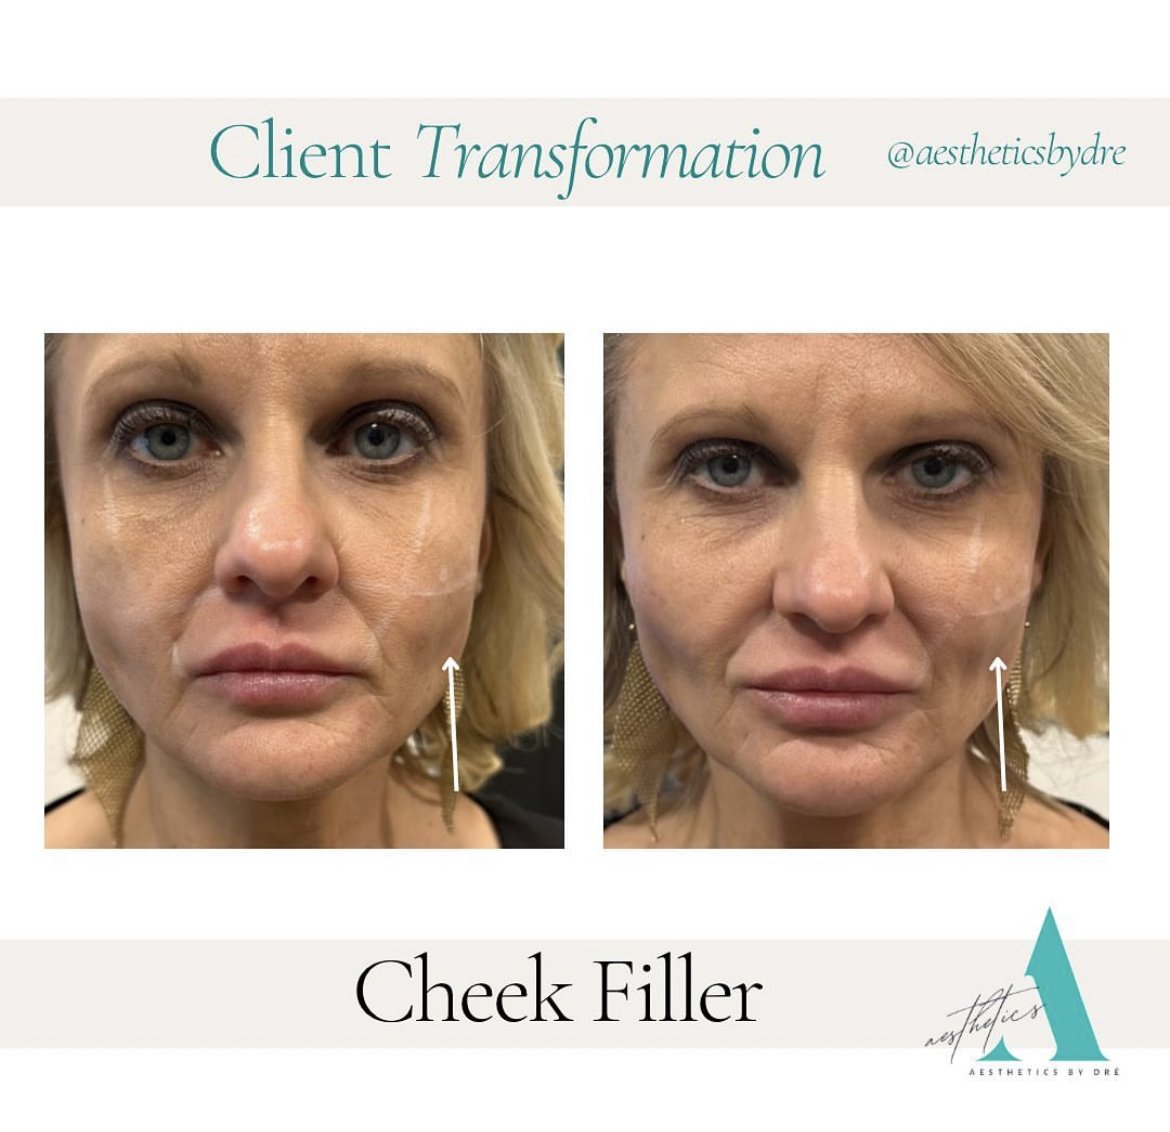 Andrea VanBeek Cheek Filler Before and After Photo